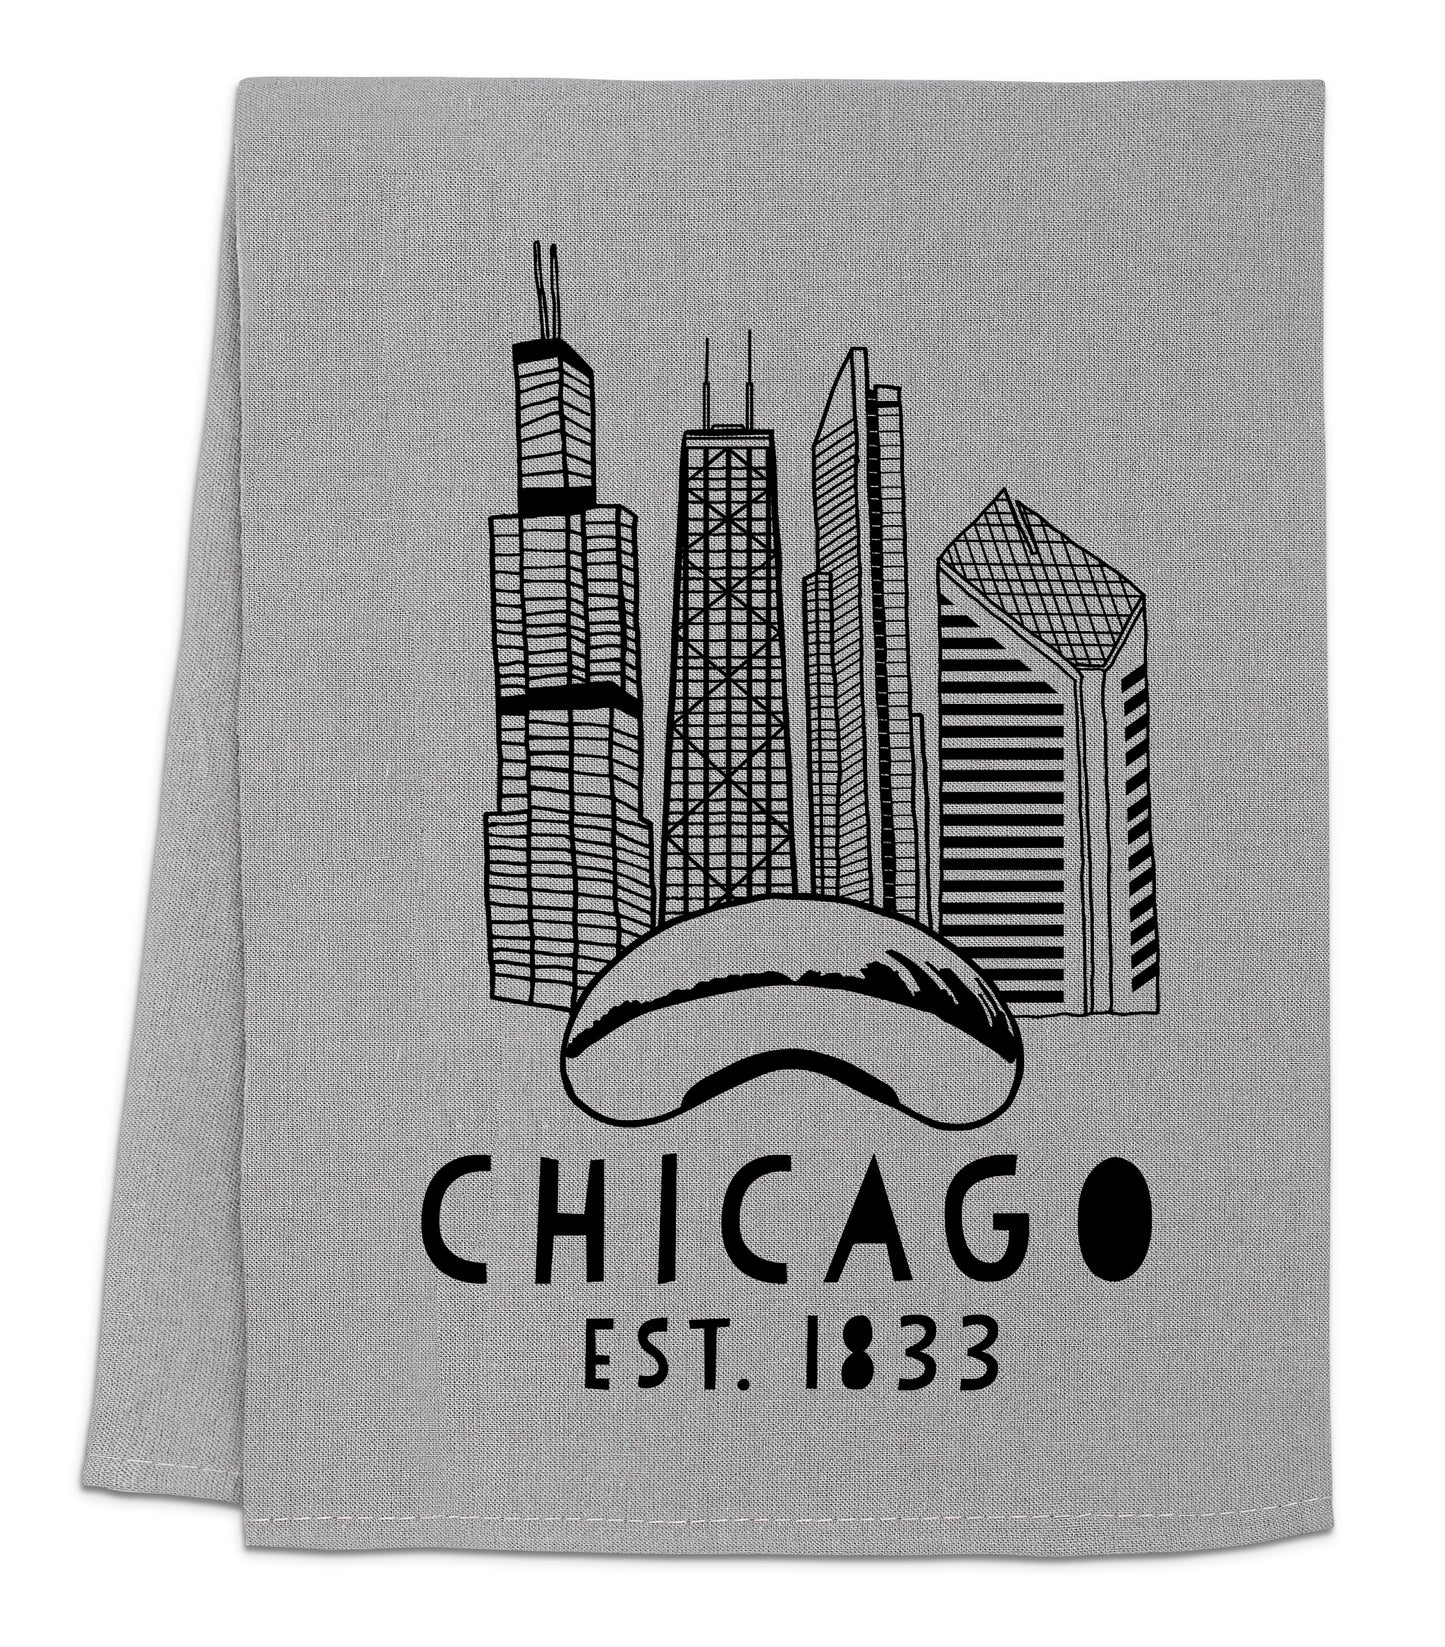 a gray towel with a chicago skyline on it